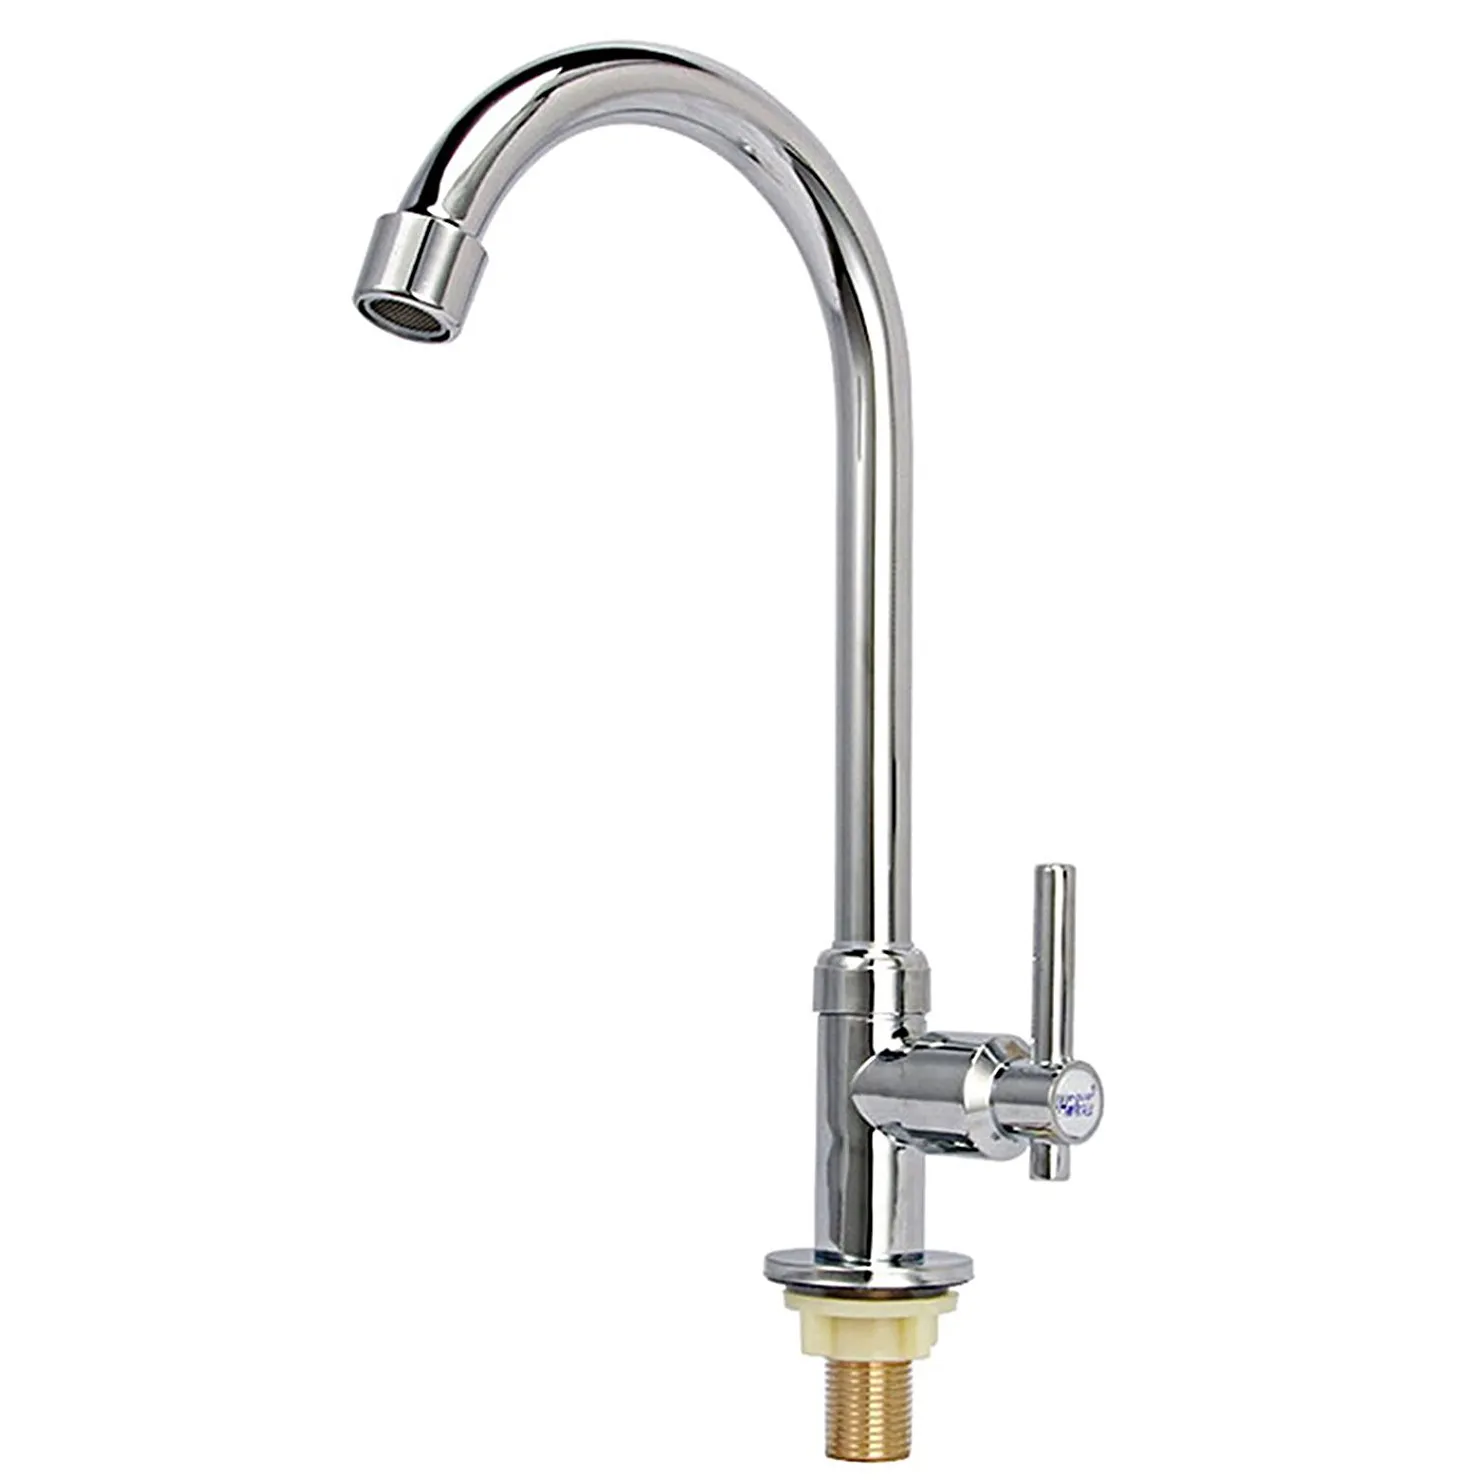 Easy Install Stainless Steel Bathroom Faucet Single Handle Single Hole High Arc Cold Water Sink Faucets for Bathroom,Outdoor Garden and Bar.